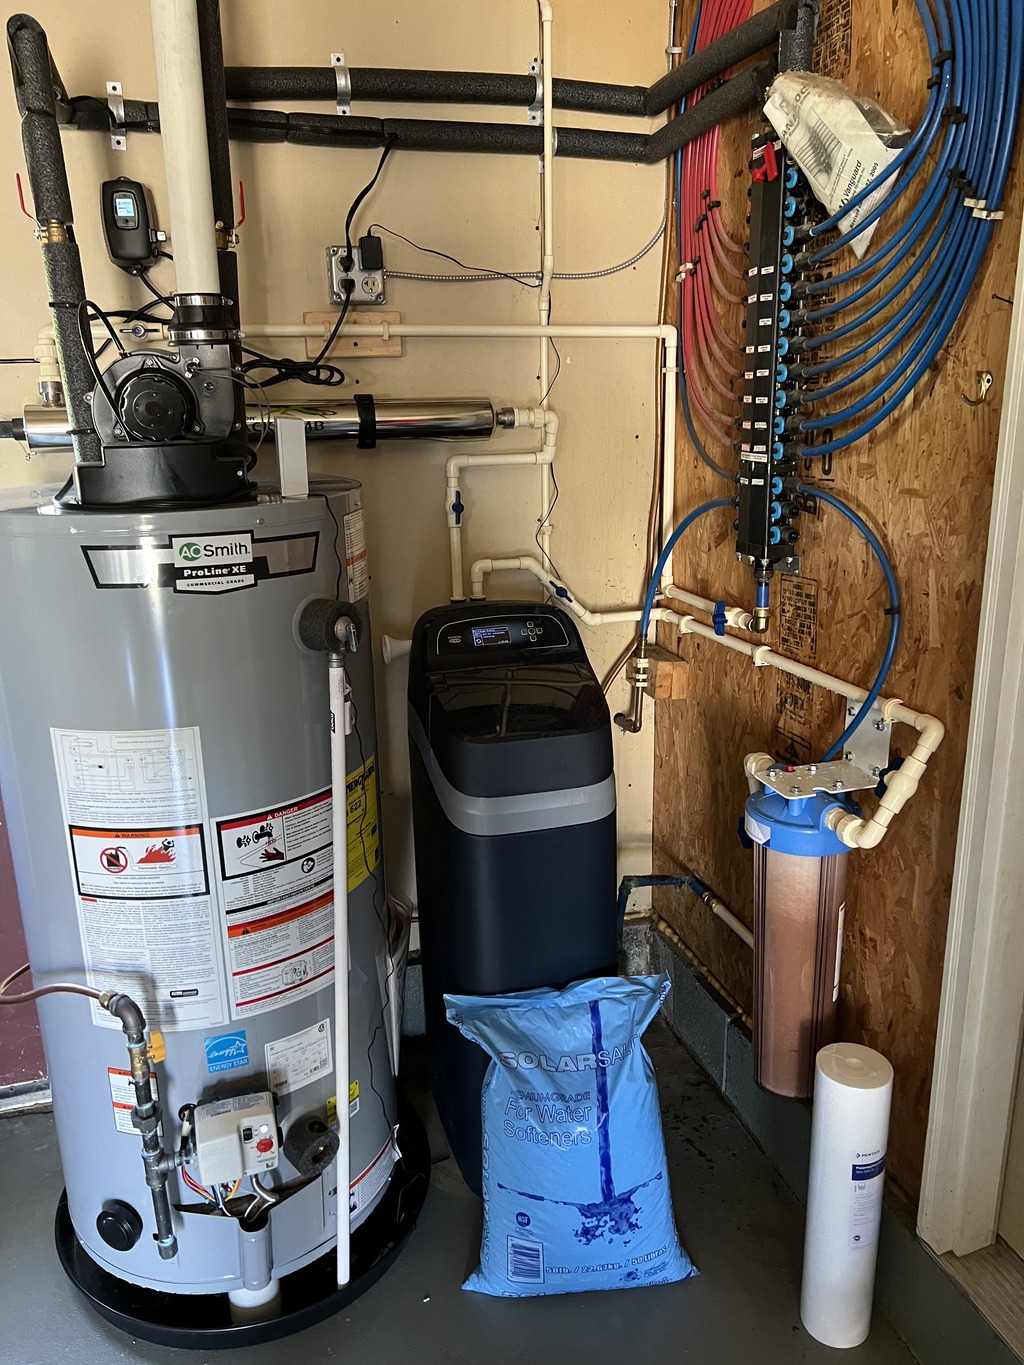 water treatment system next to water heater and a bag of salt